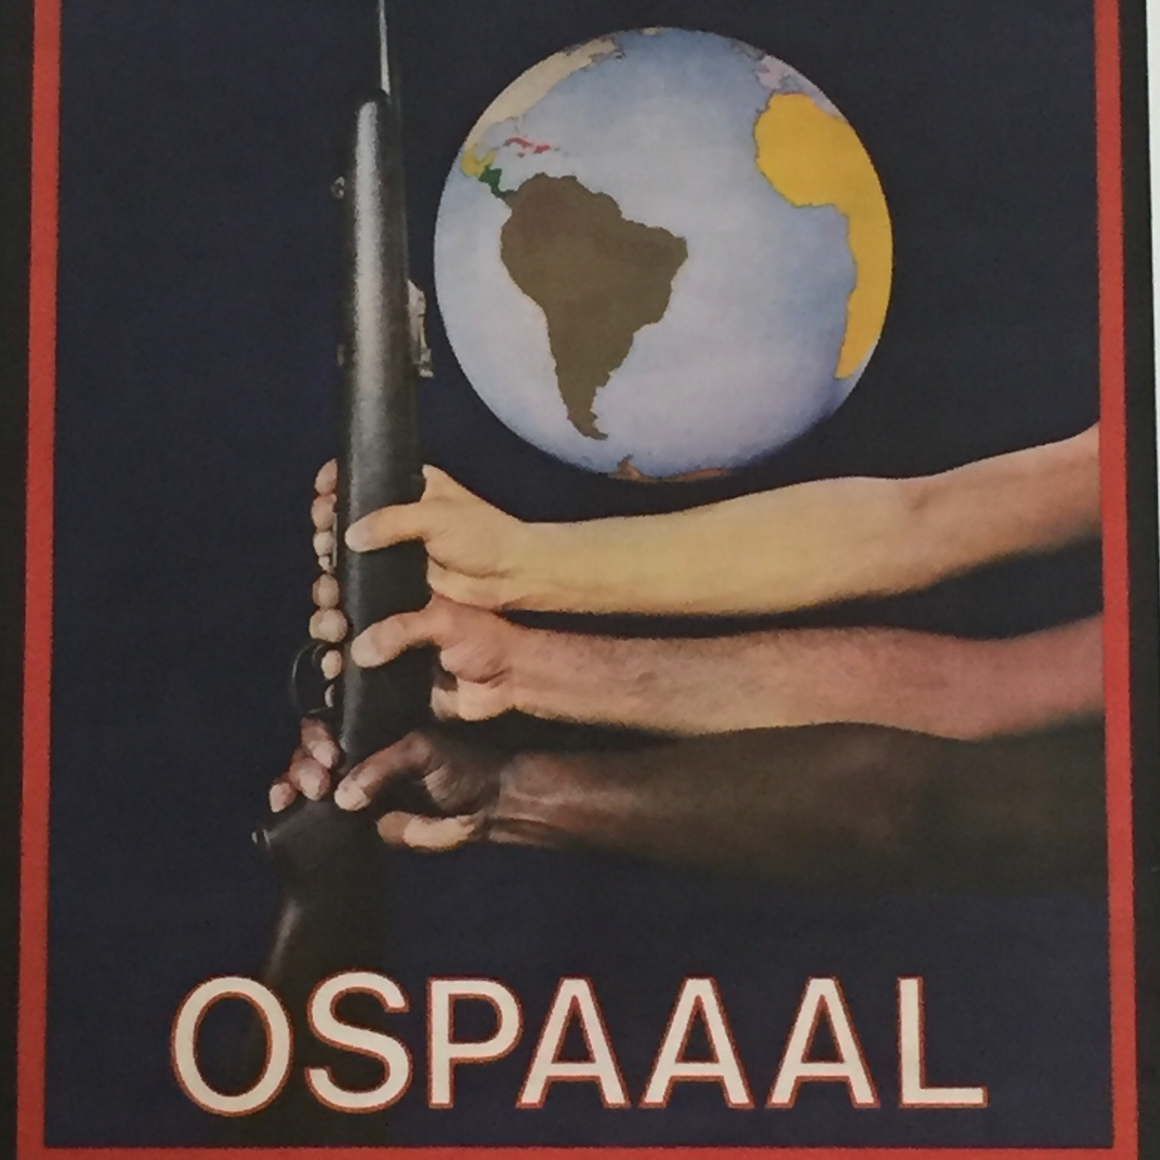 "15 Years of Tricontinental Solidarity", OSPAAAL, Rafael Enríquez, Possibly 1981.